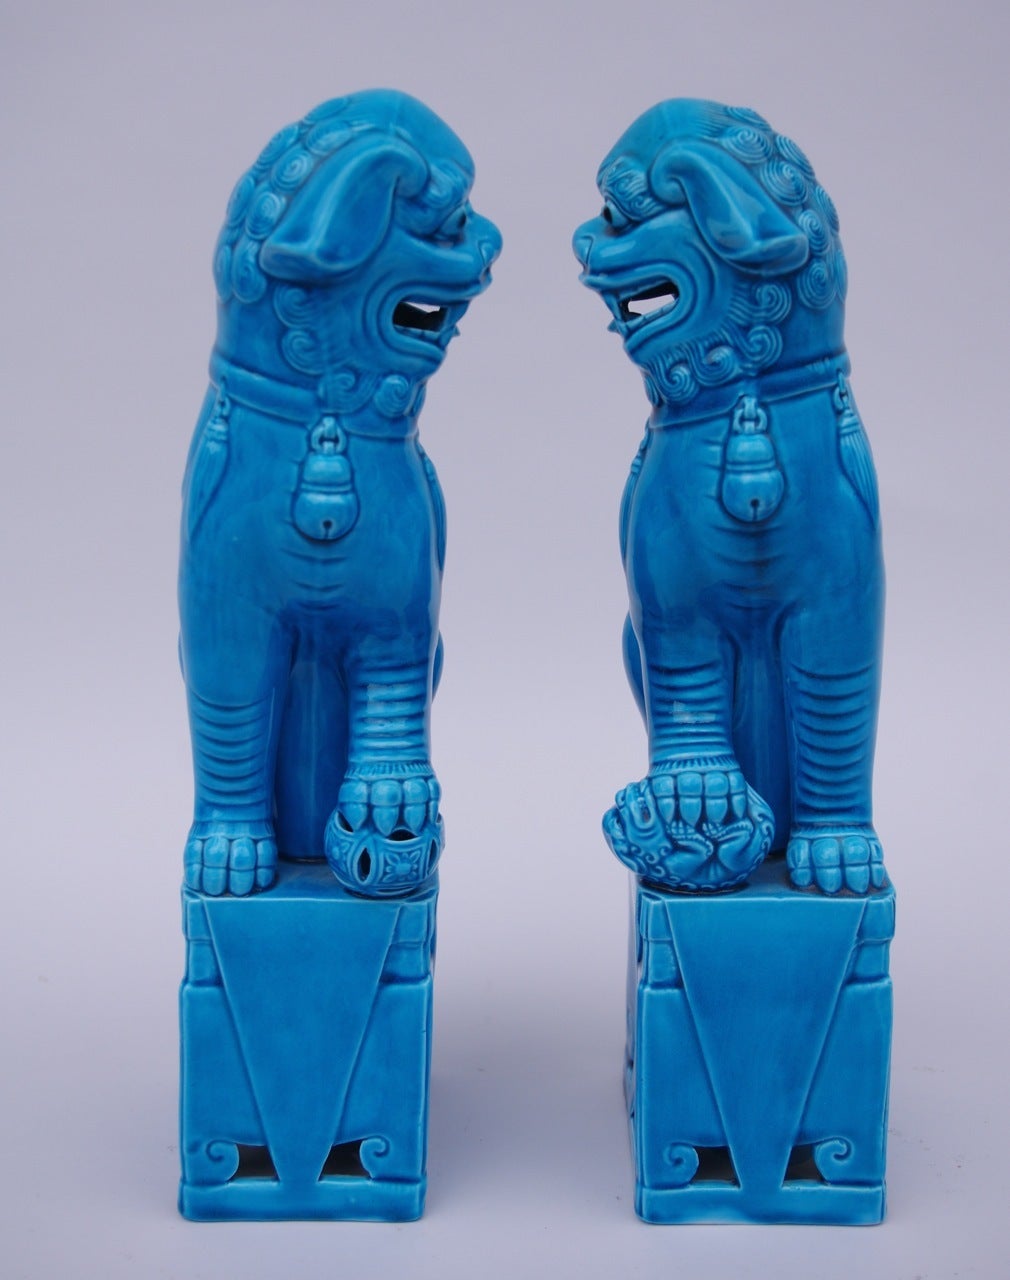 Chinese Pair of Pho Dogs Sculptures in Blue Porcelain, circa 1900